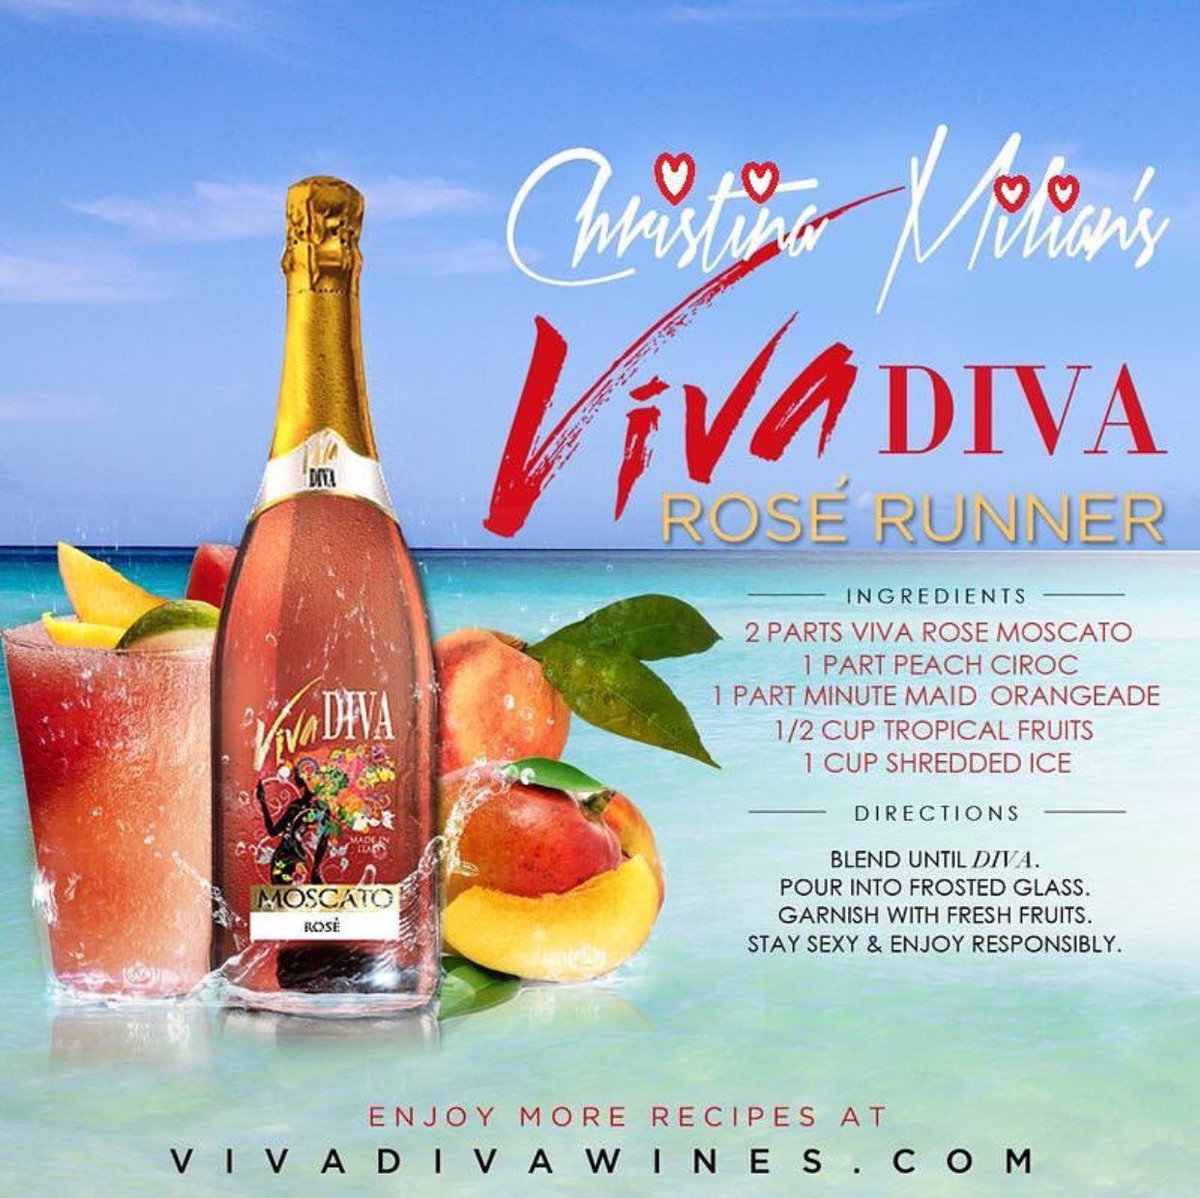 Try this amazing Rosé Runner cocktail w my #Moscato! @VivaDivaWines buy a bottle @ retail or https://t.co/Kssk1lN87P https://t.co/RLYQ9e4n4o